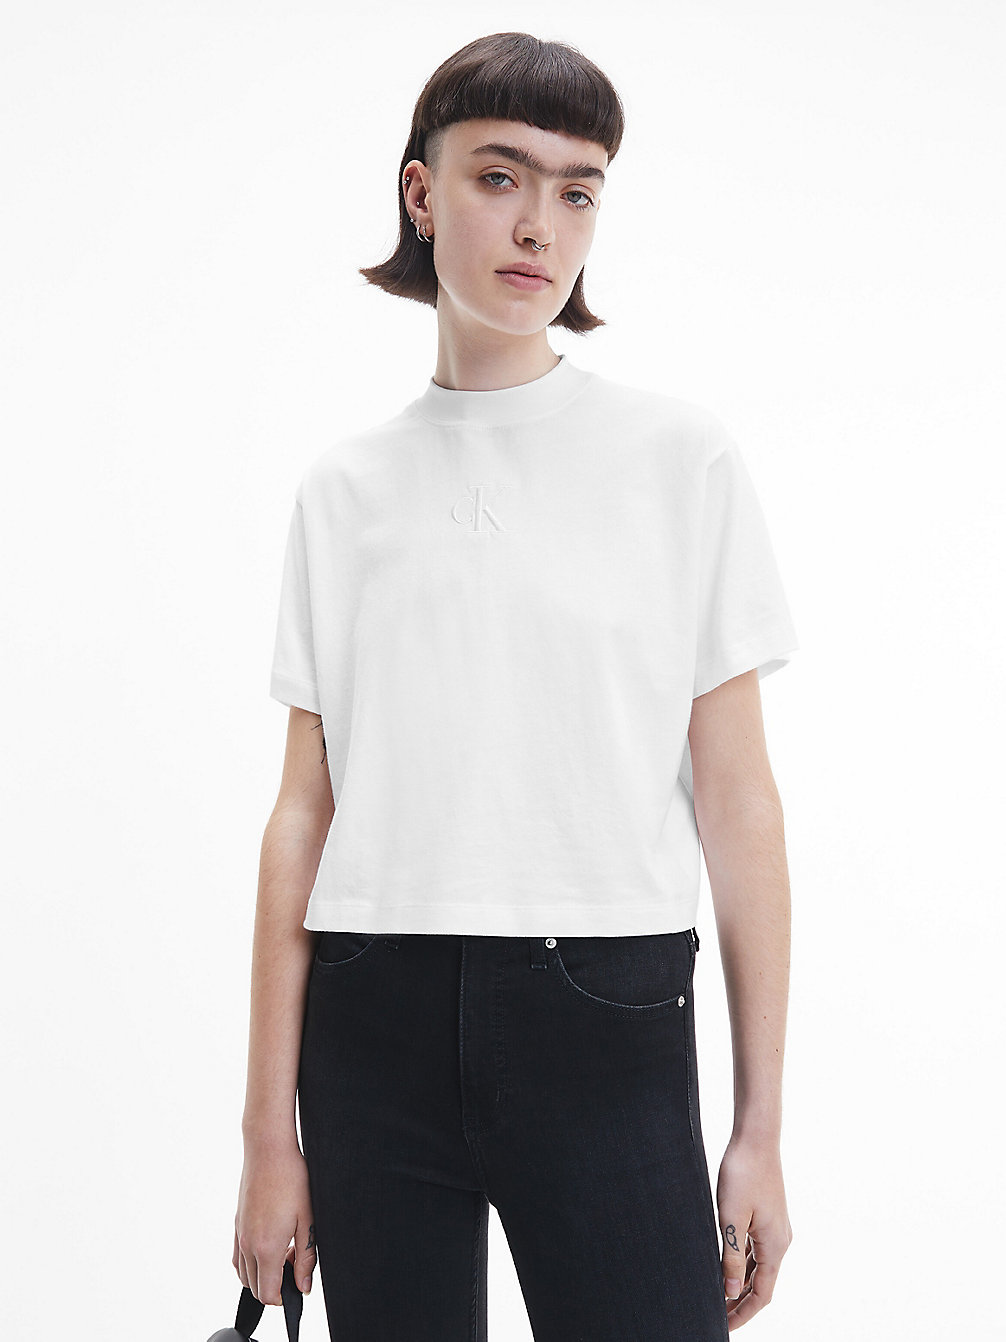 BRIGHT WHITE T-Shirt Taglio Relaxed undefined donna Calvin Klein